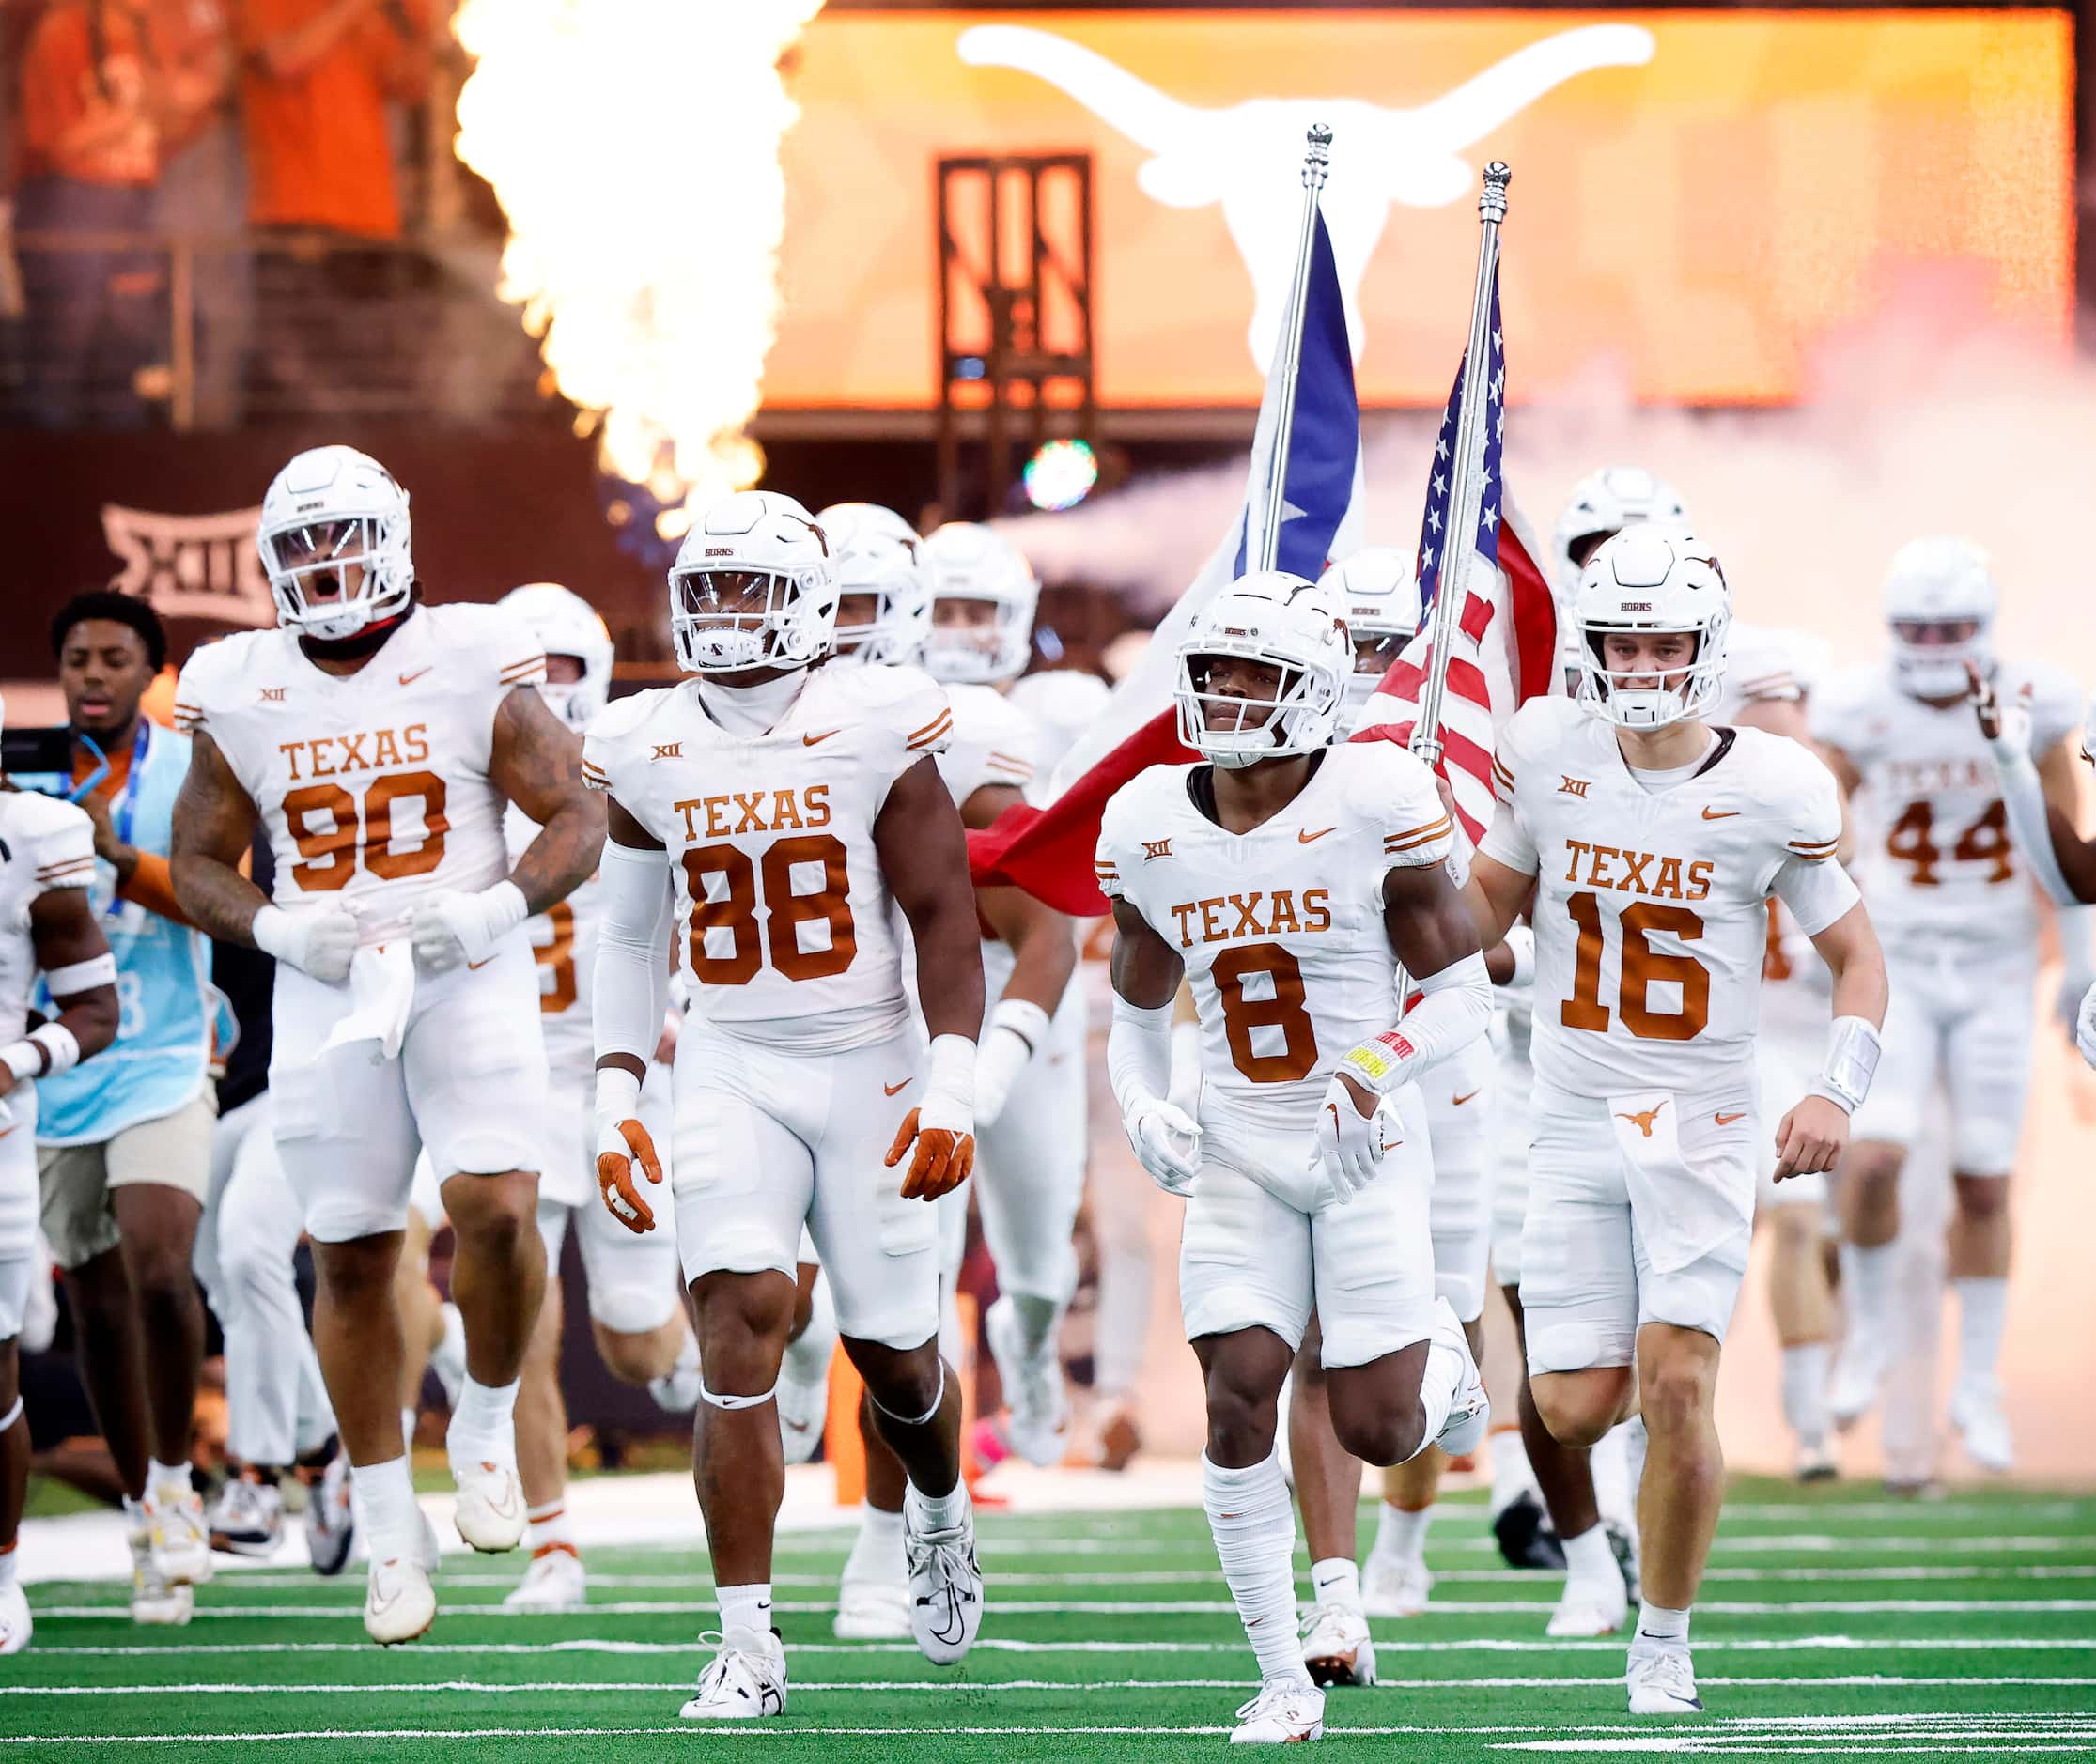 The Texas Longhorns football team races onto the field during team introductions before the...